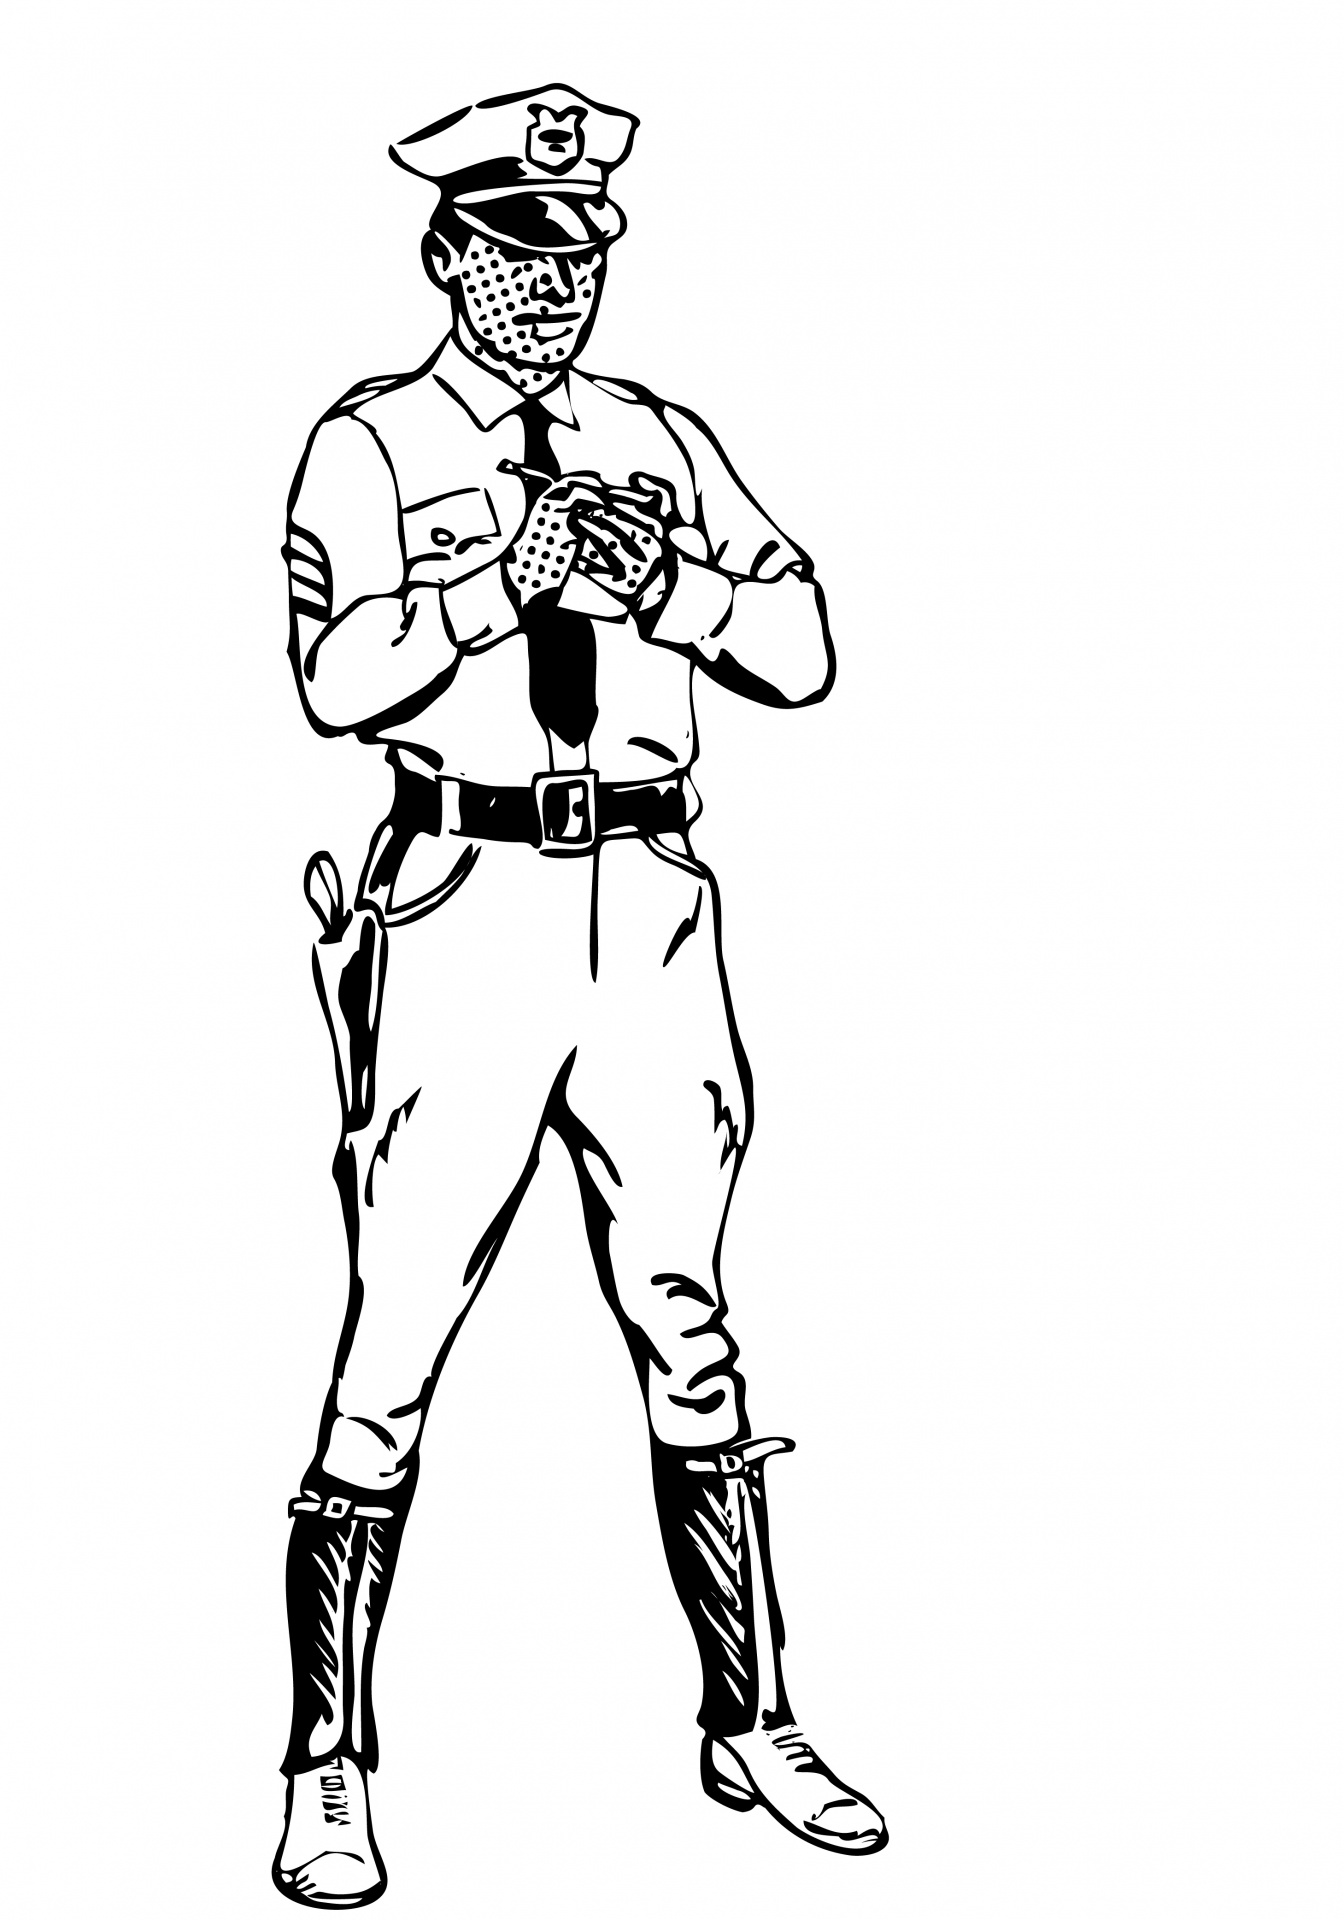 military police clipart free - photo #43